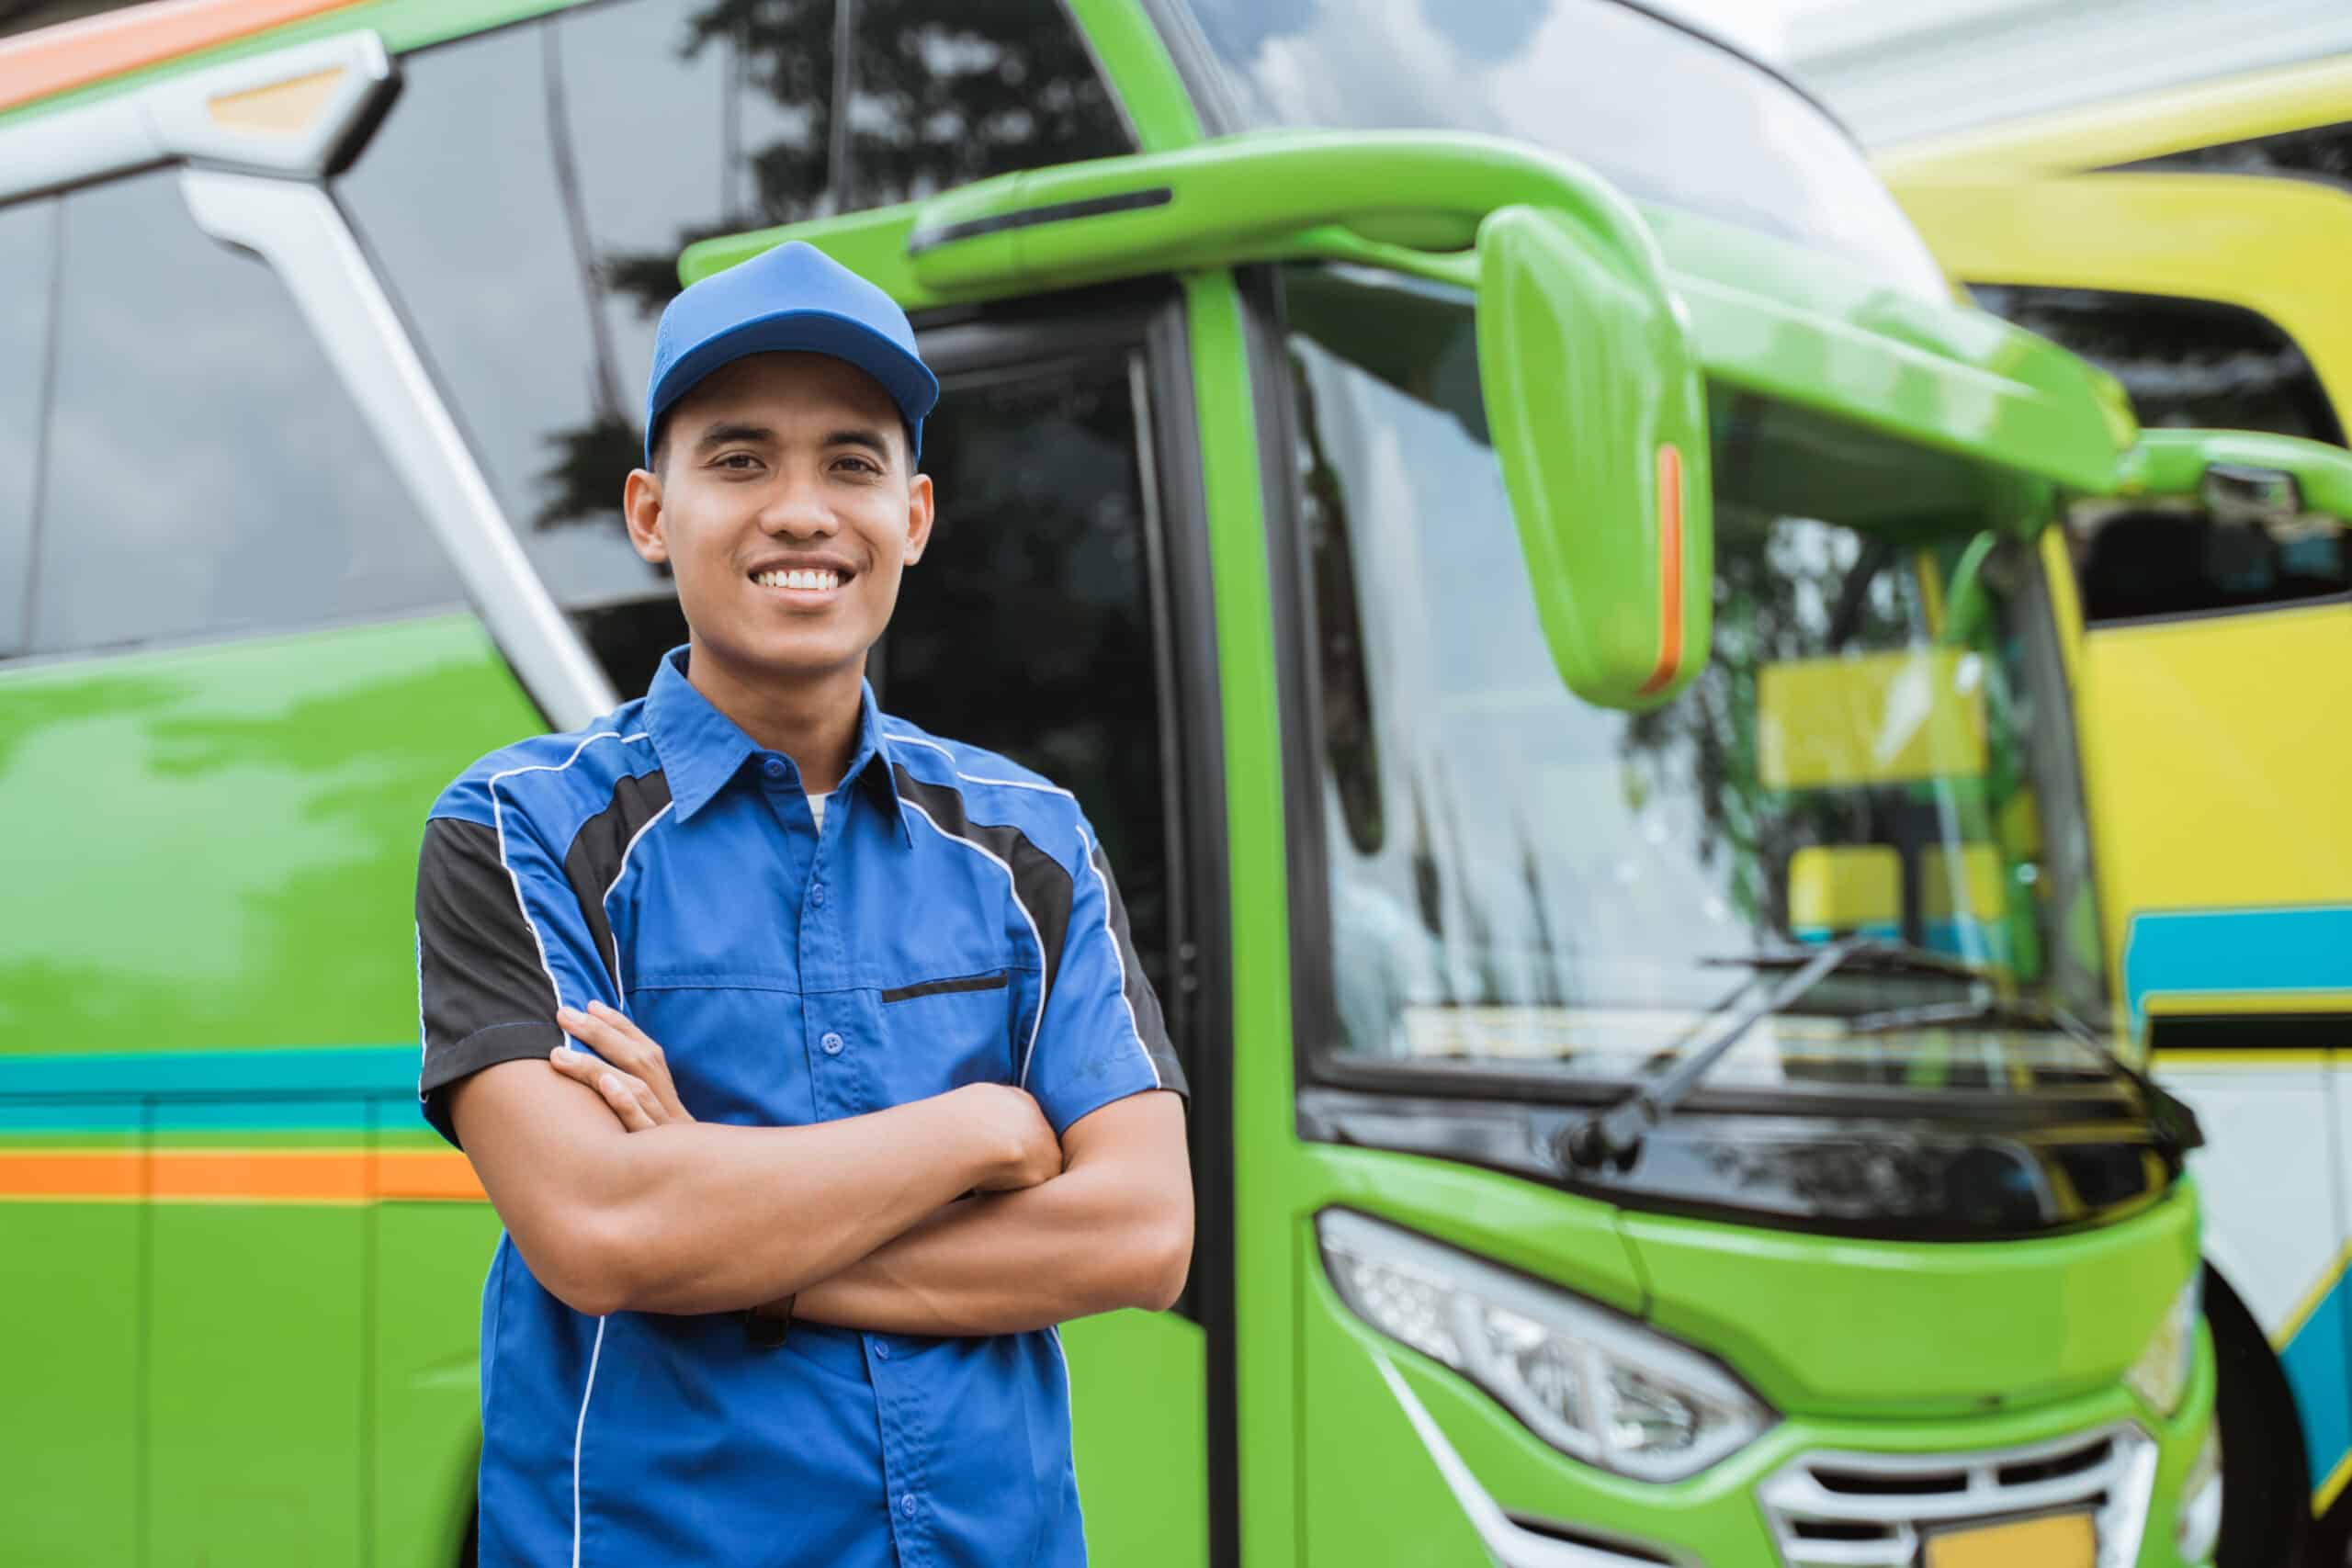 Bus Drivers Can Now Immigrate To Canada Through Express Entry